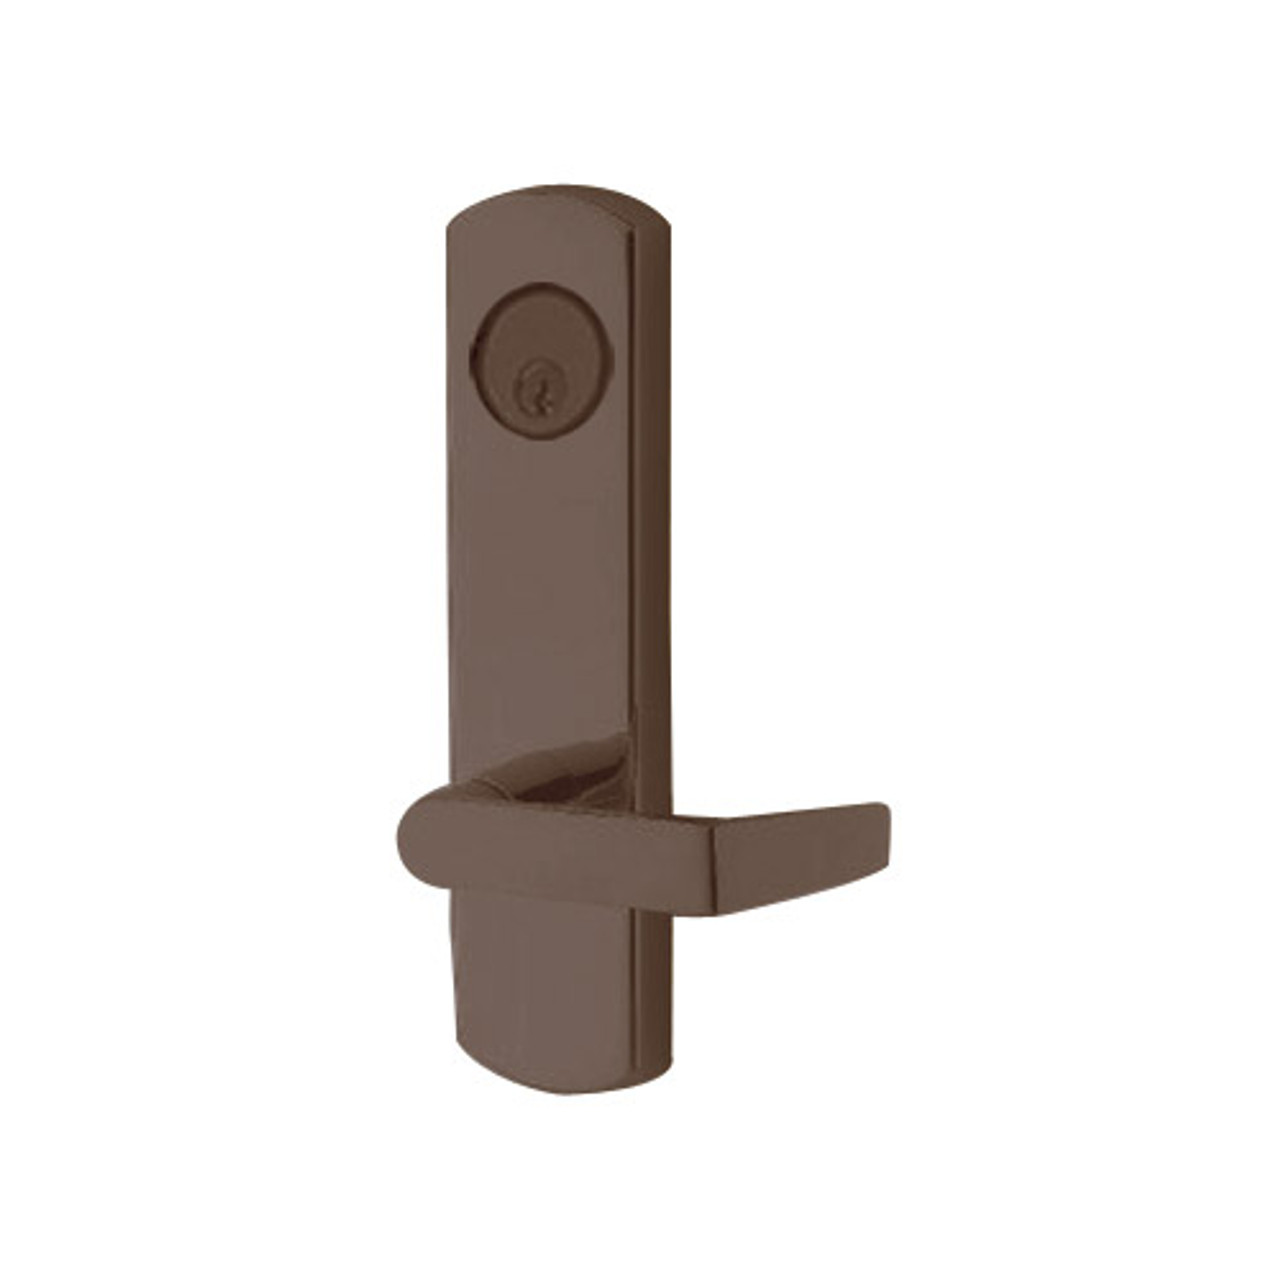 3080E-03-0-33-35 US10B Adams Rite Electrified Entry Trim with Square Lever in Oil Rubbed Bronze Finish